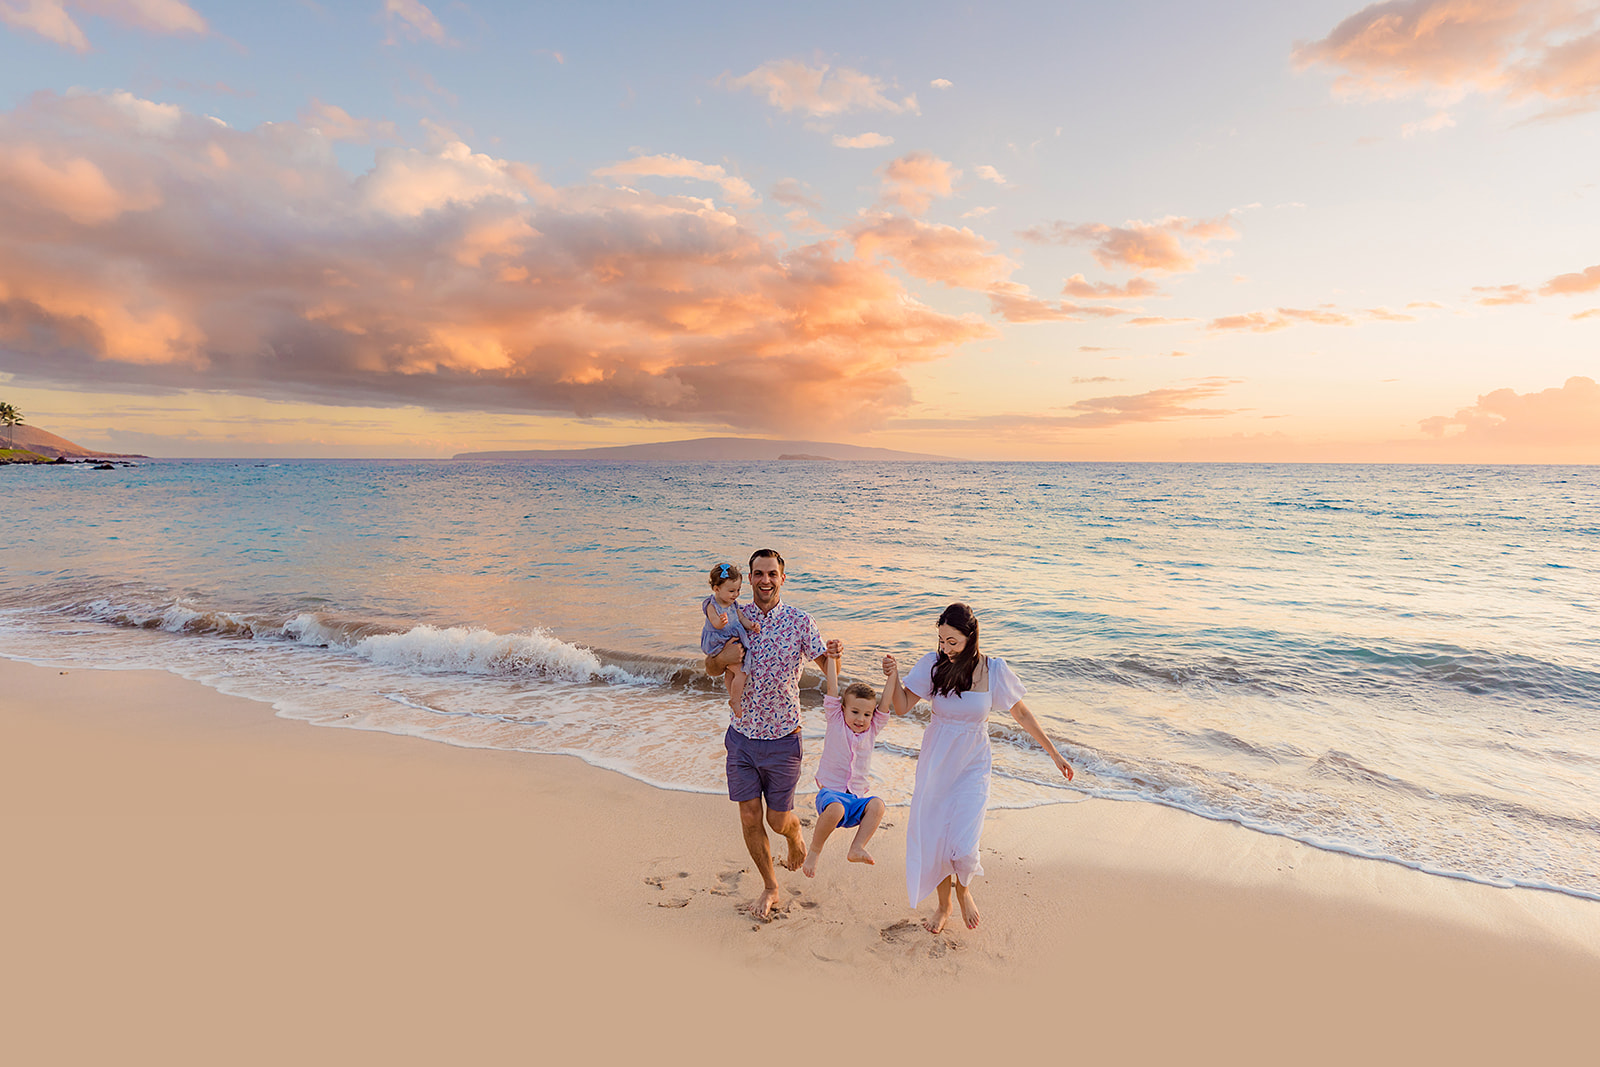 A family with two parents and two children walk playfully together on during family beach pictures on Maui.